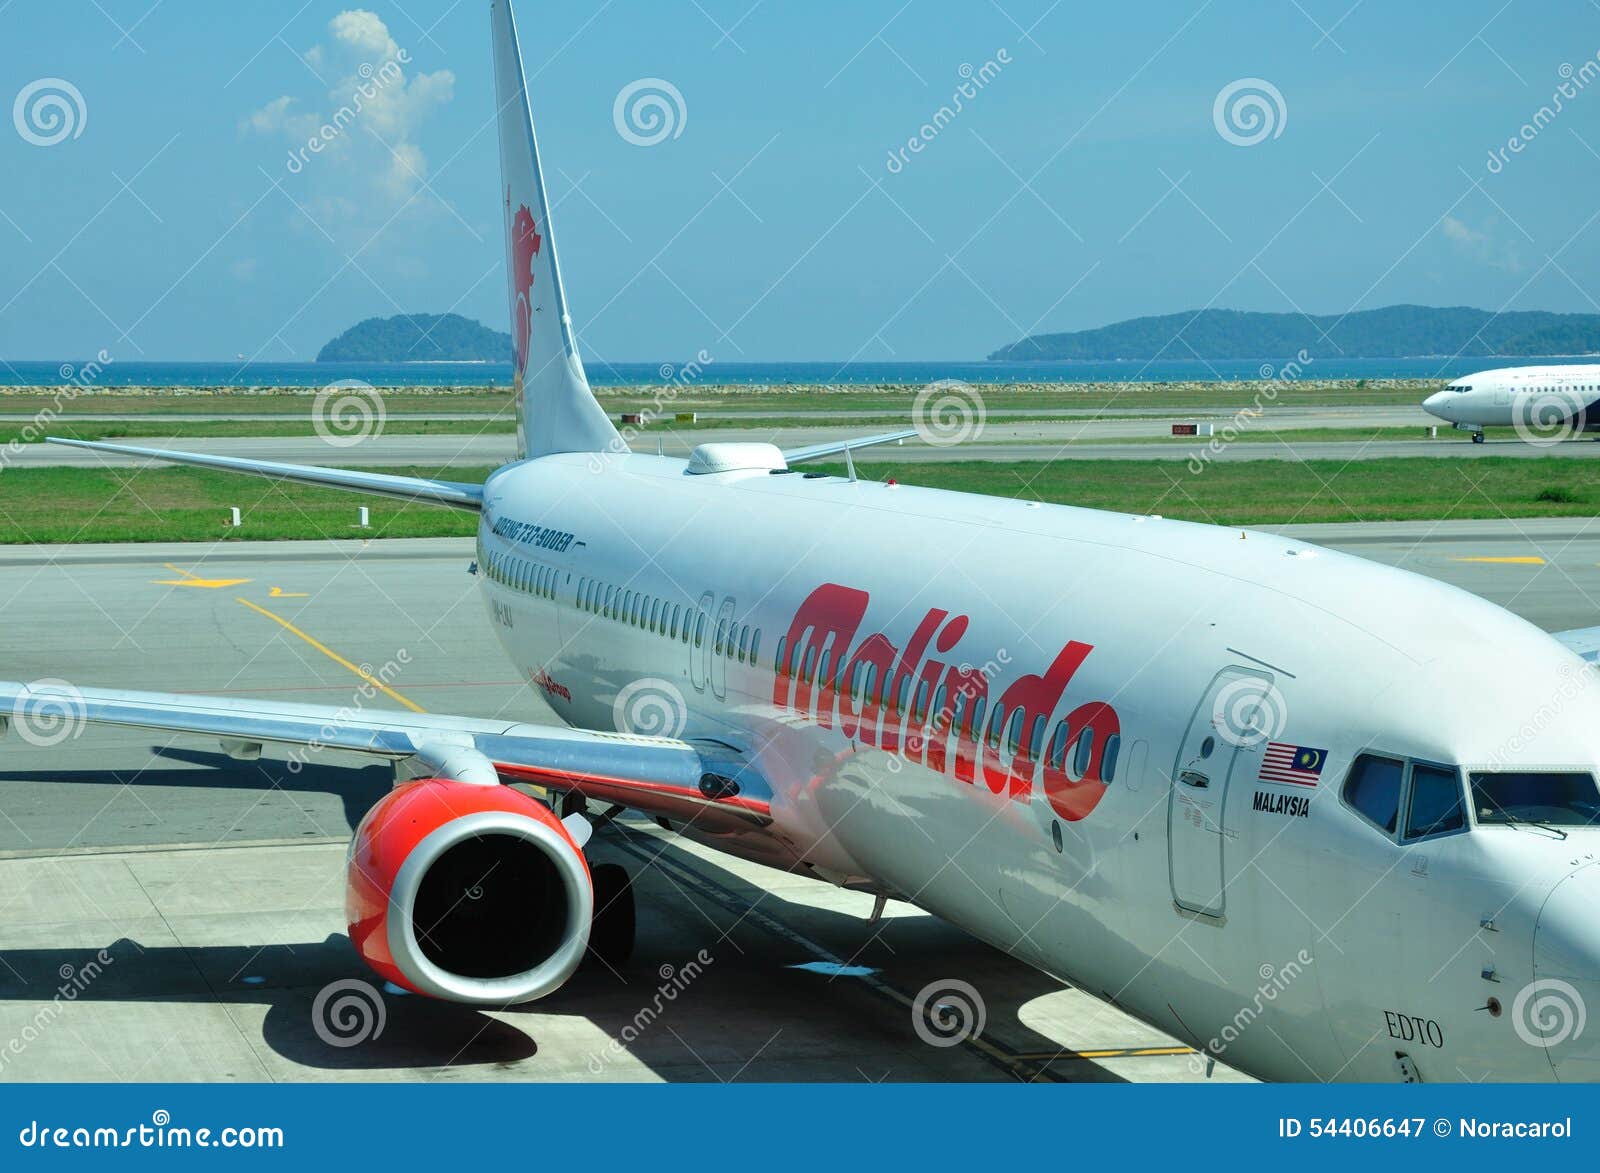 Malindo Air Airline Logo On The Mobile Phone Screen With A Plane ...